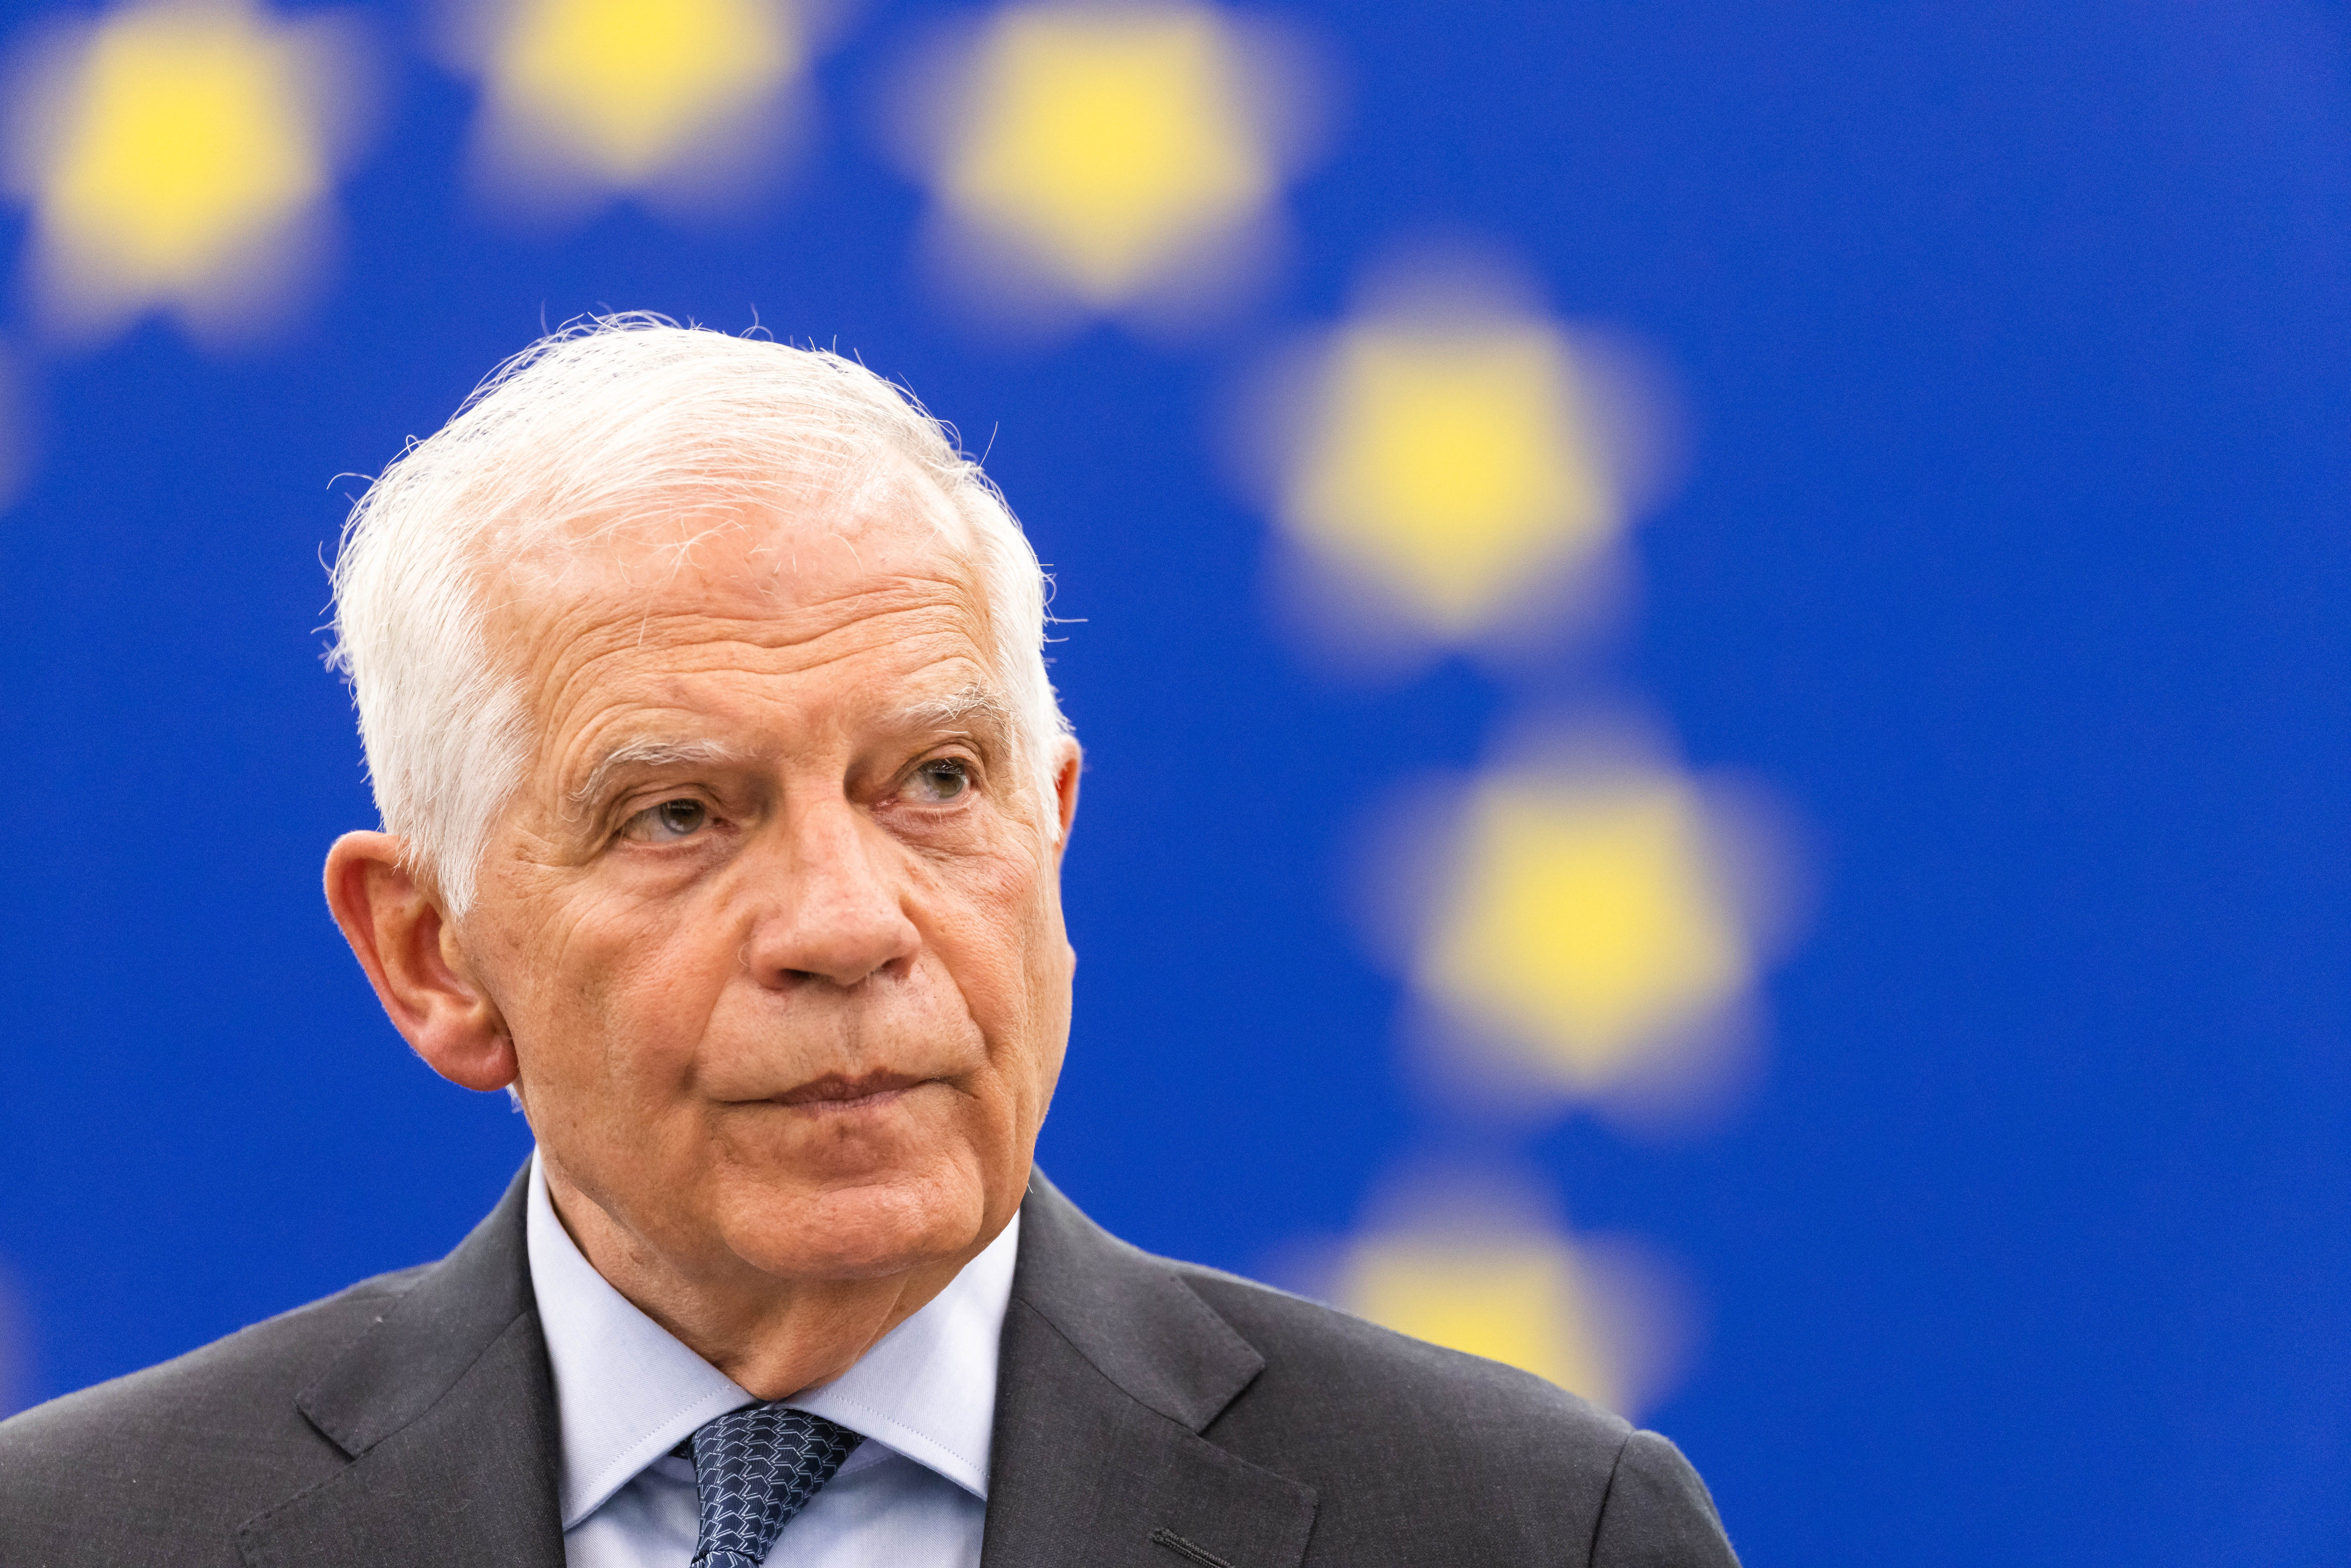 Josep Borrell, the EU’s top diplomat, has vowed to raise trade issues with China’s foreign minister when they meet in Beijing on Friday. Photo: dpa